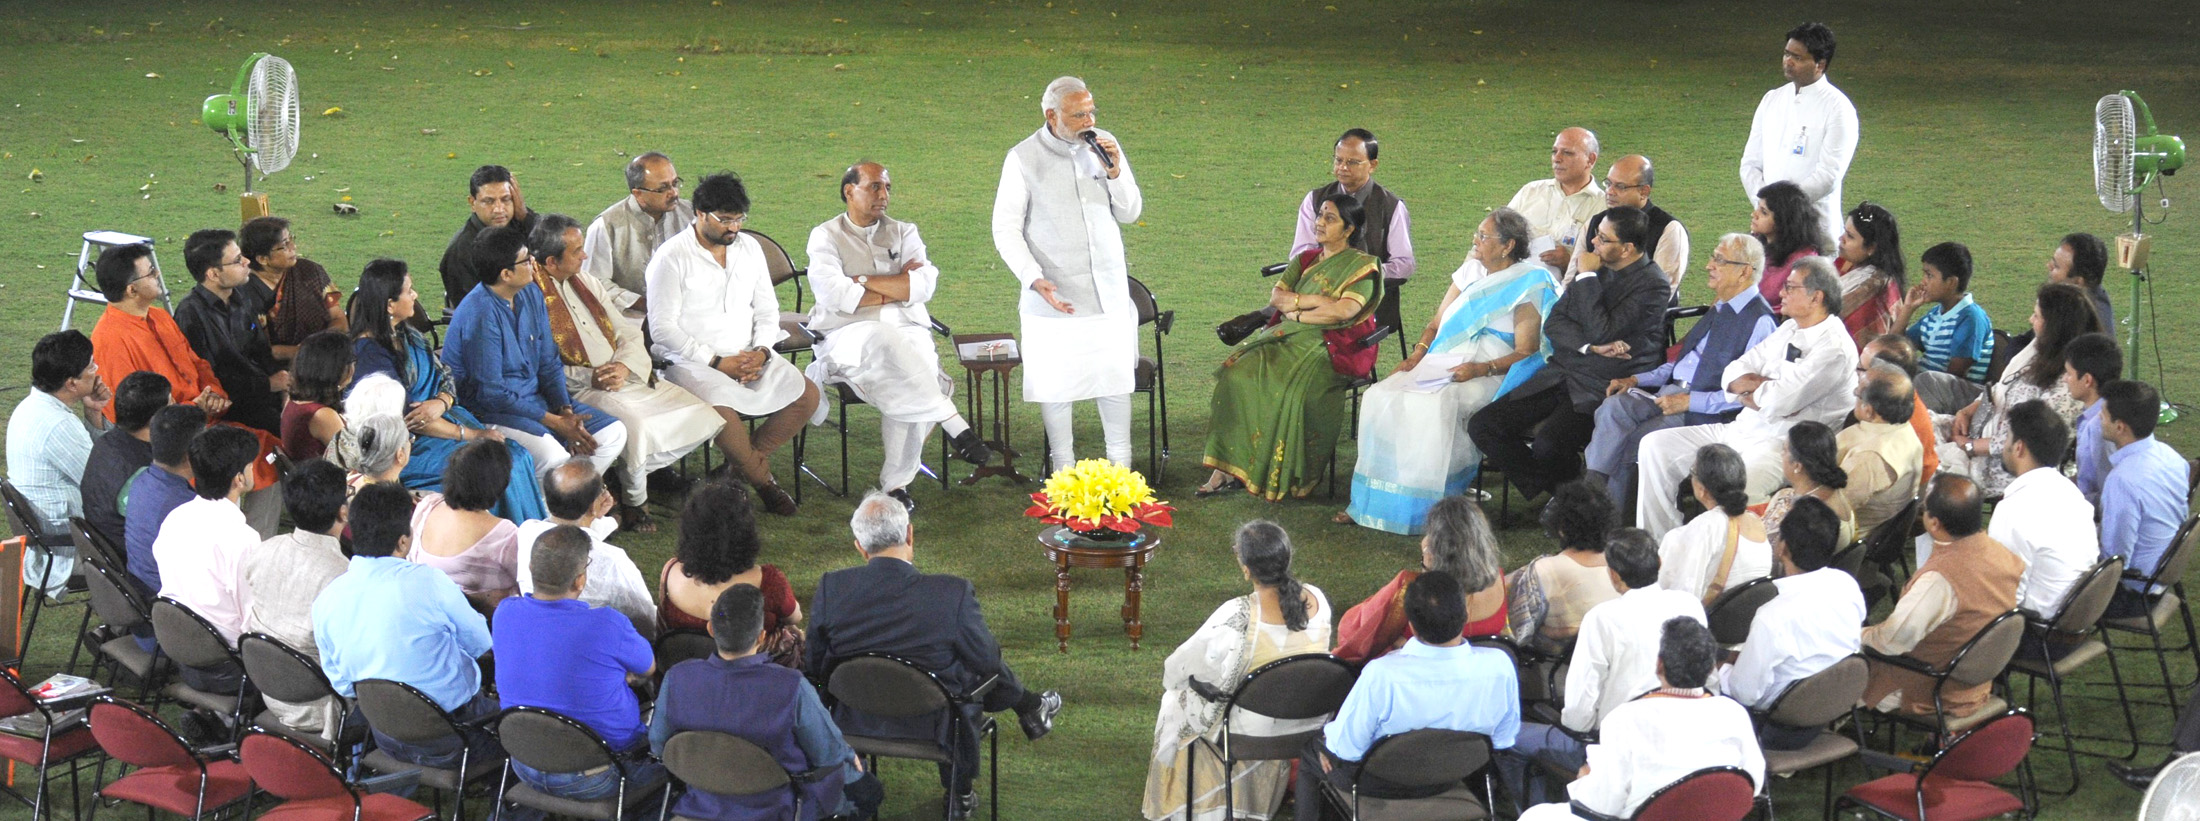 The Prime Minister, Shri Narendra Modi interacting with the family members of Netaji Subhas Chandra Bose, at 7, Race Course Road, in New Delhi on October 14, 2015.